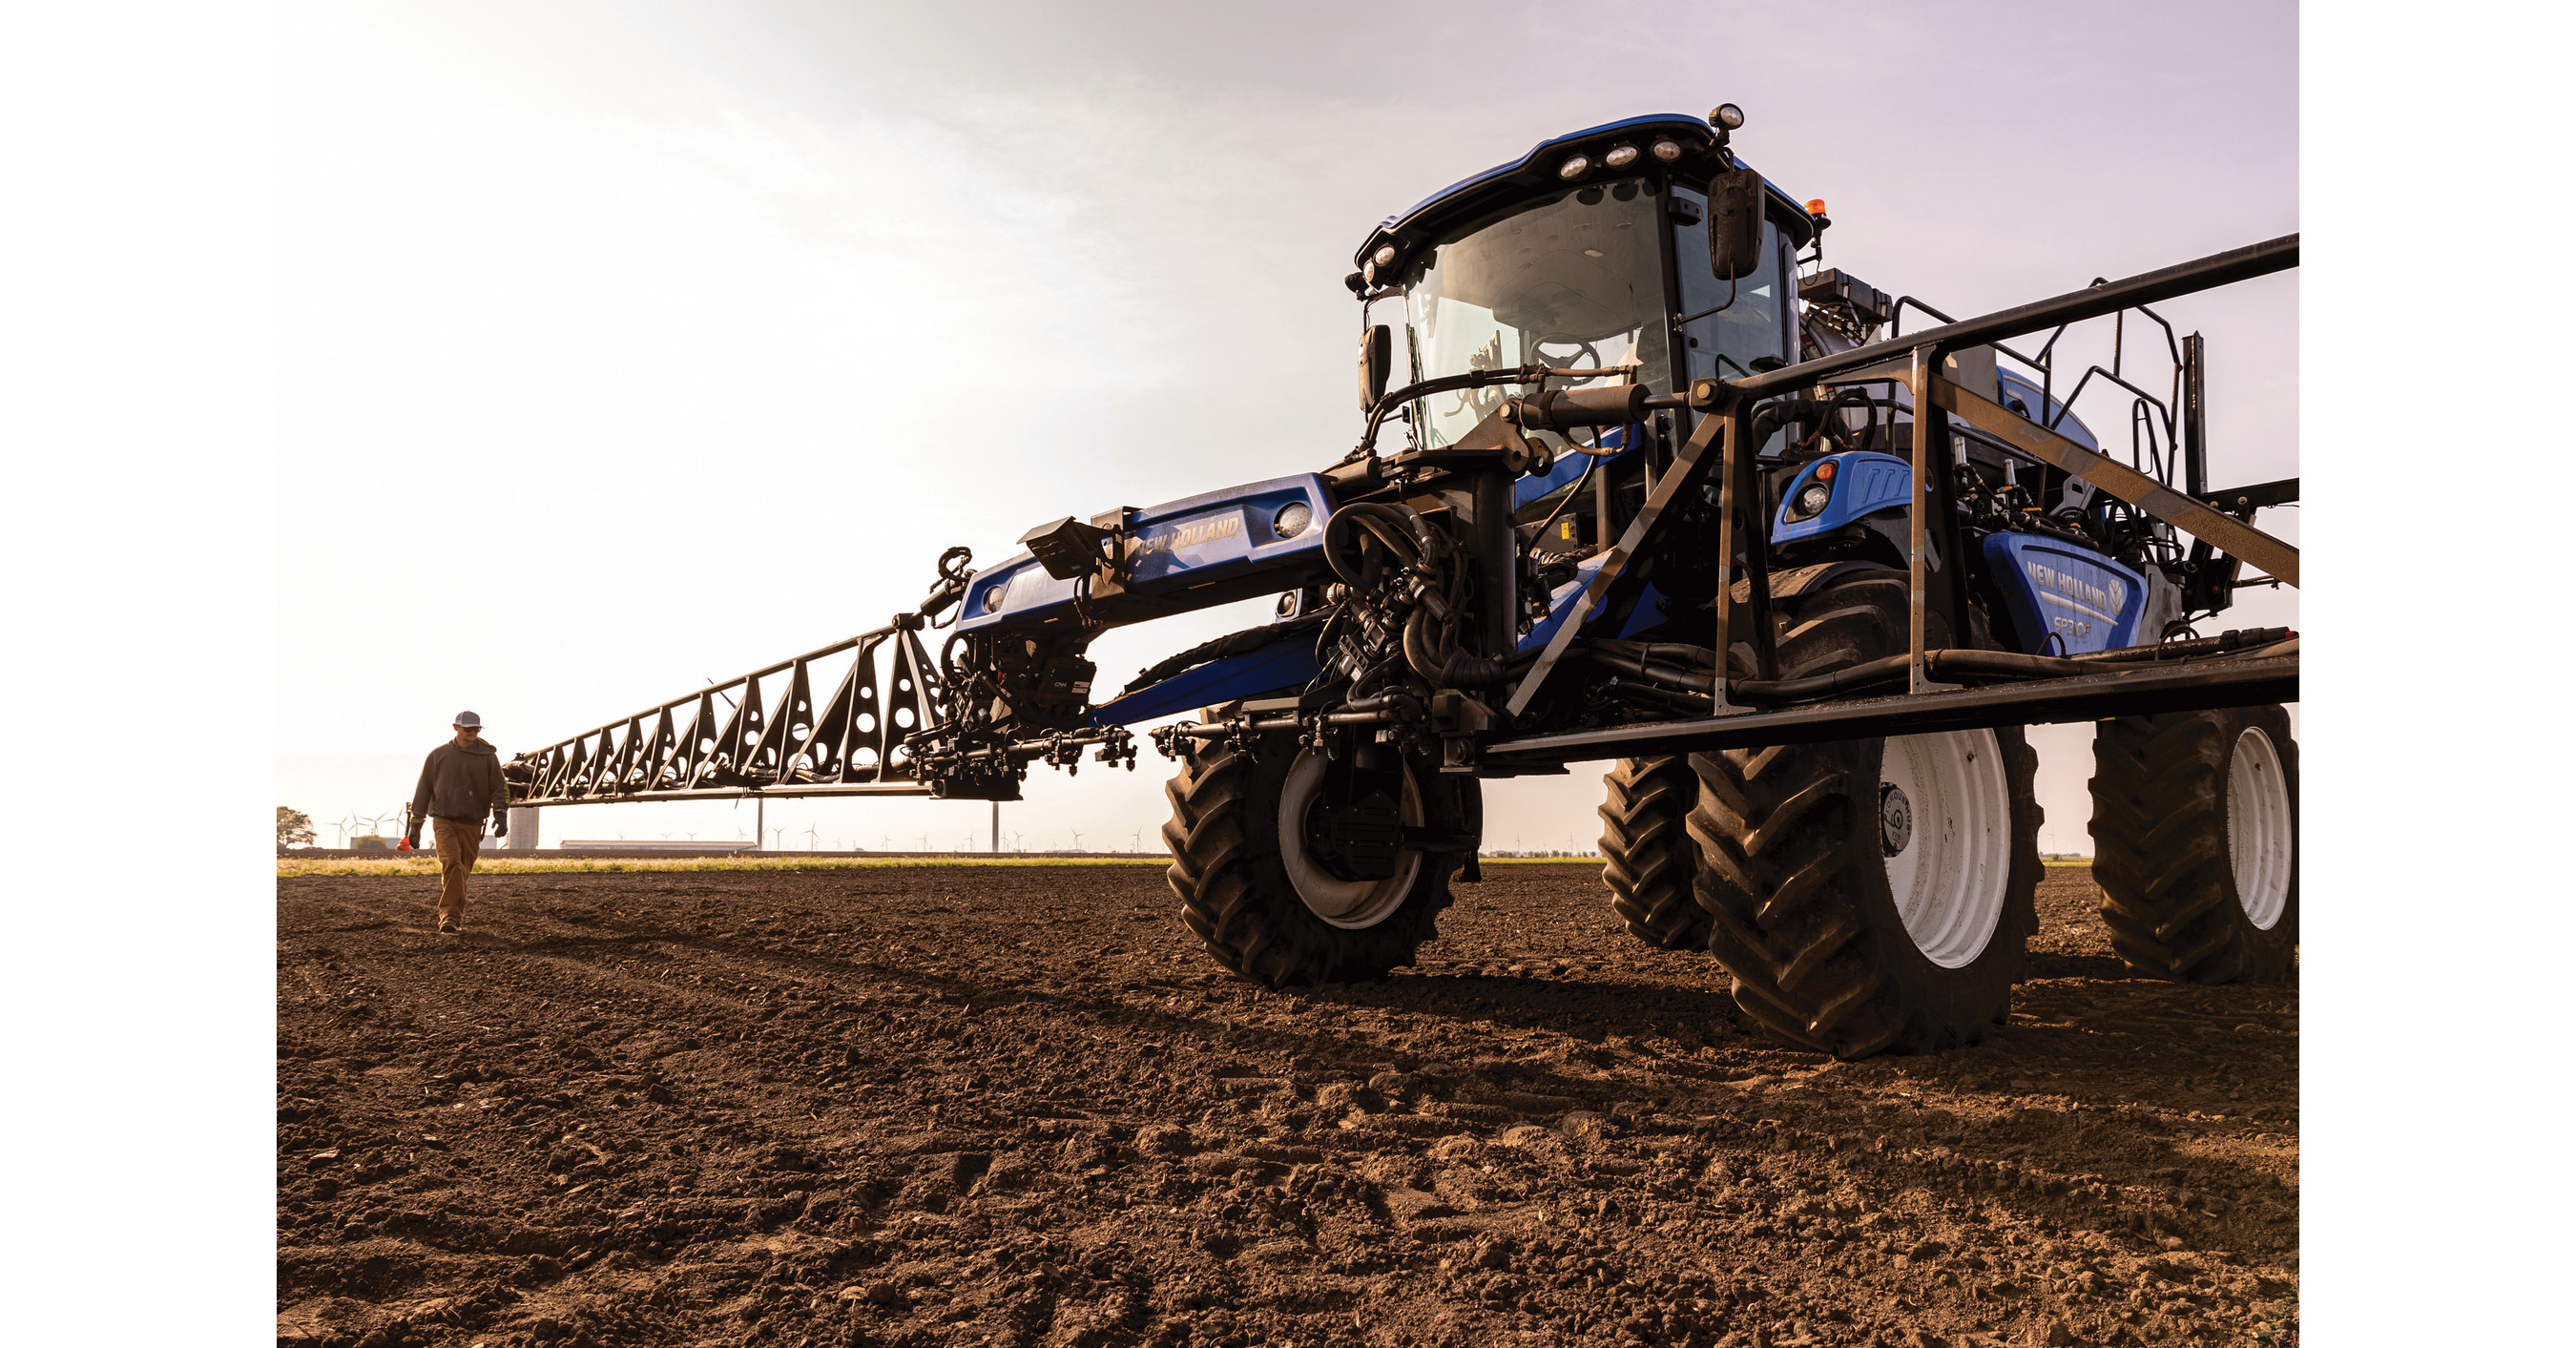 New Holland Agriculture Publicly Launches the Industry's First All-Electric  Utility Tractor with Autonomous Features -- the Revolutionary T4 Electric  Power Tractor